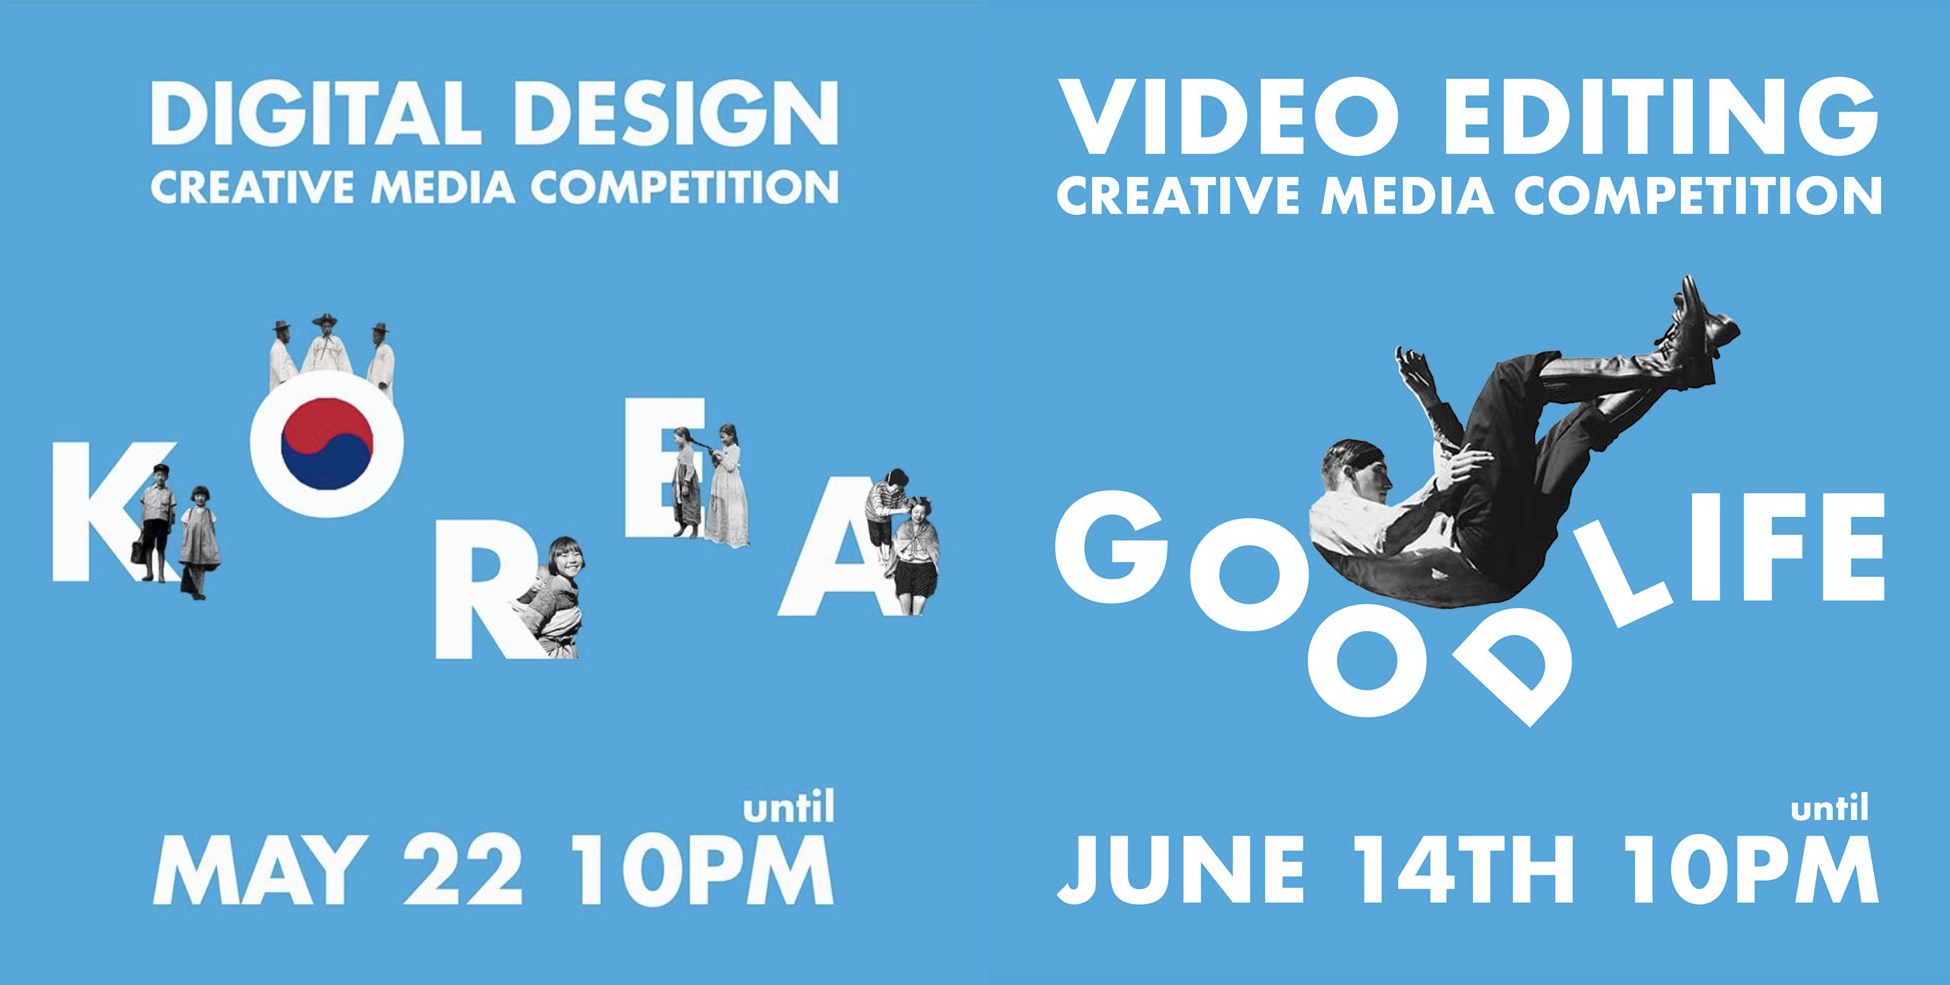 Photo 1: Official poster images of Creative Media Competition